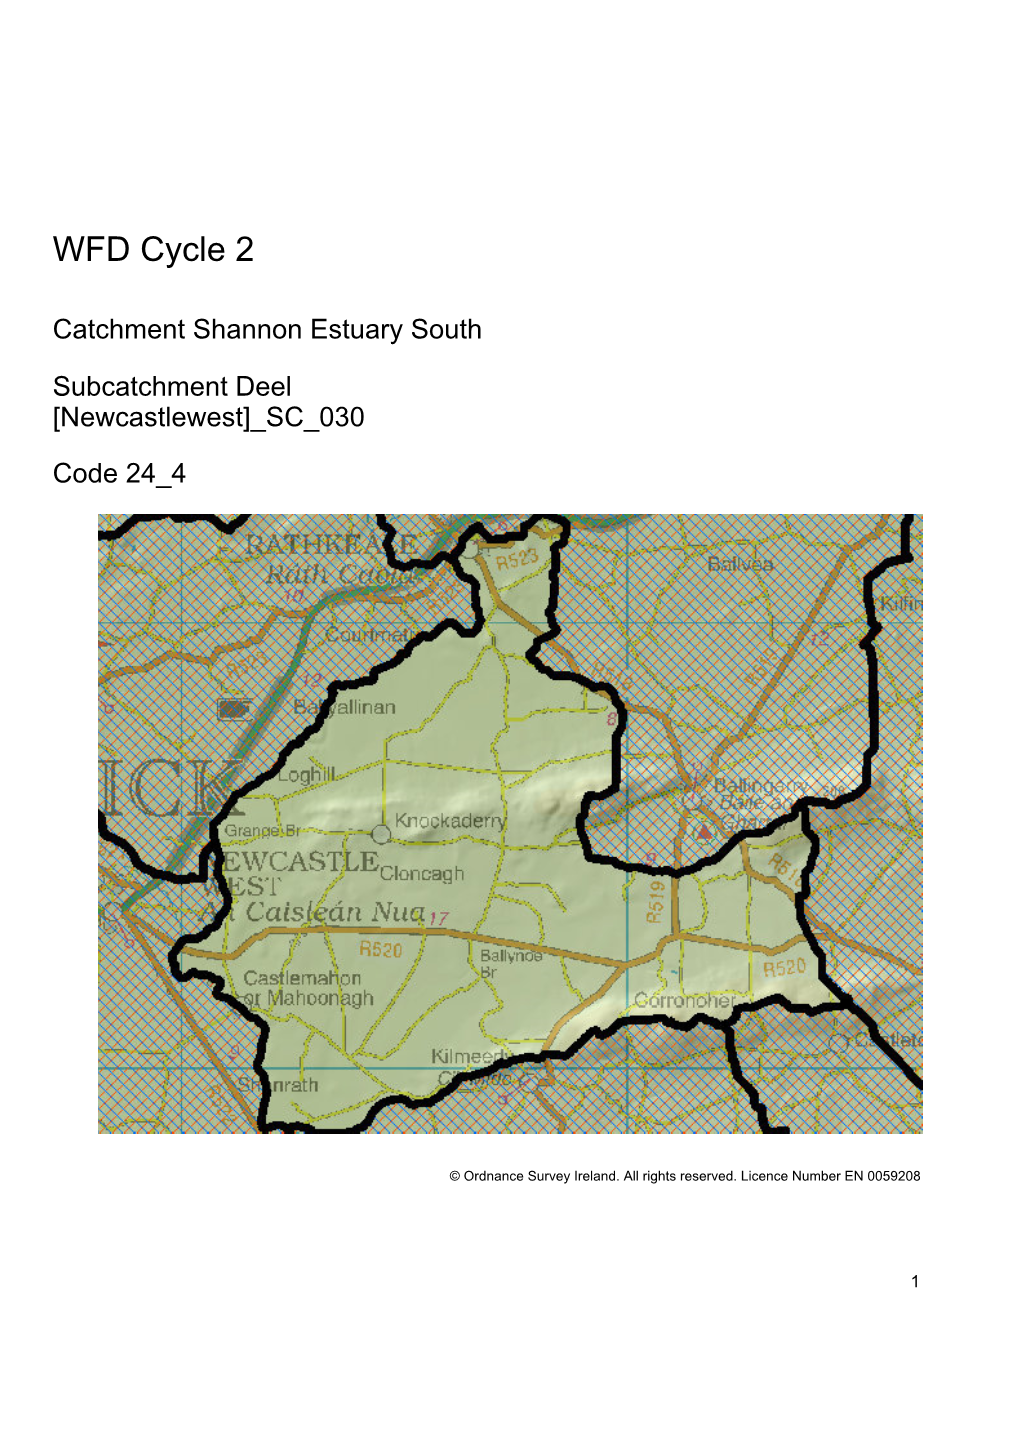 24 4 Deel[Newcastlewest] SC 030 Subcatchment Assessment WFD Cycle 2.Pdf